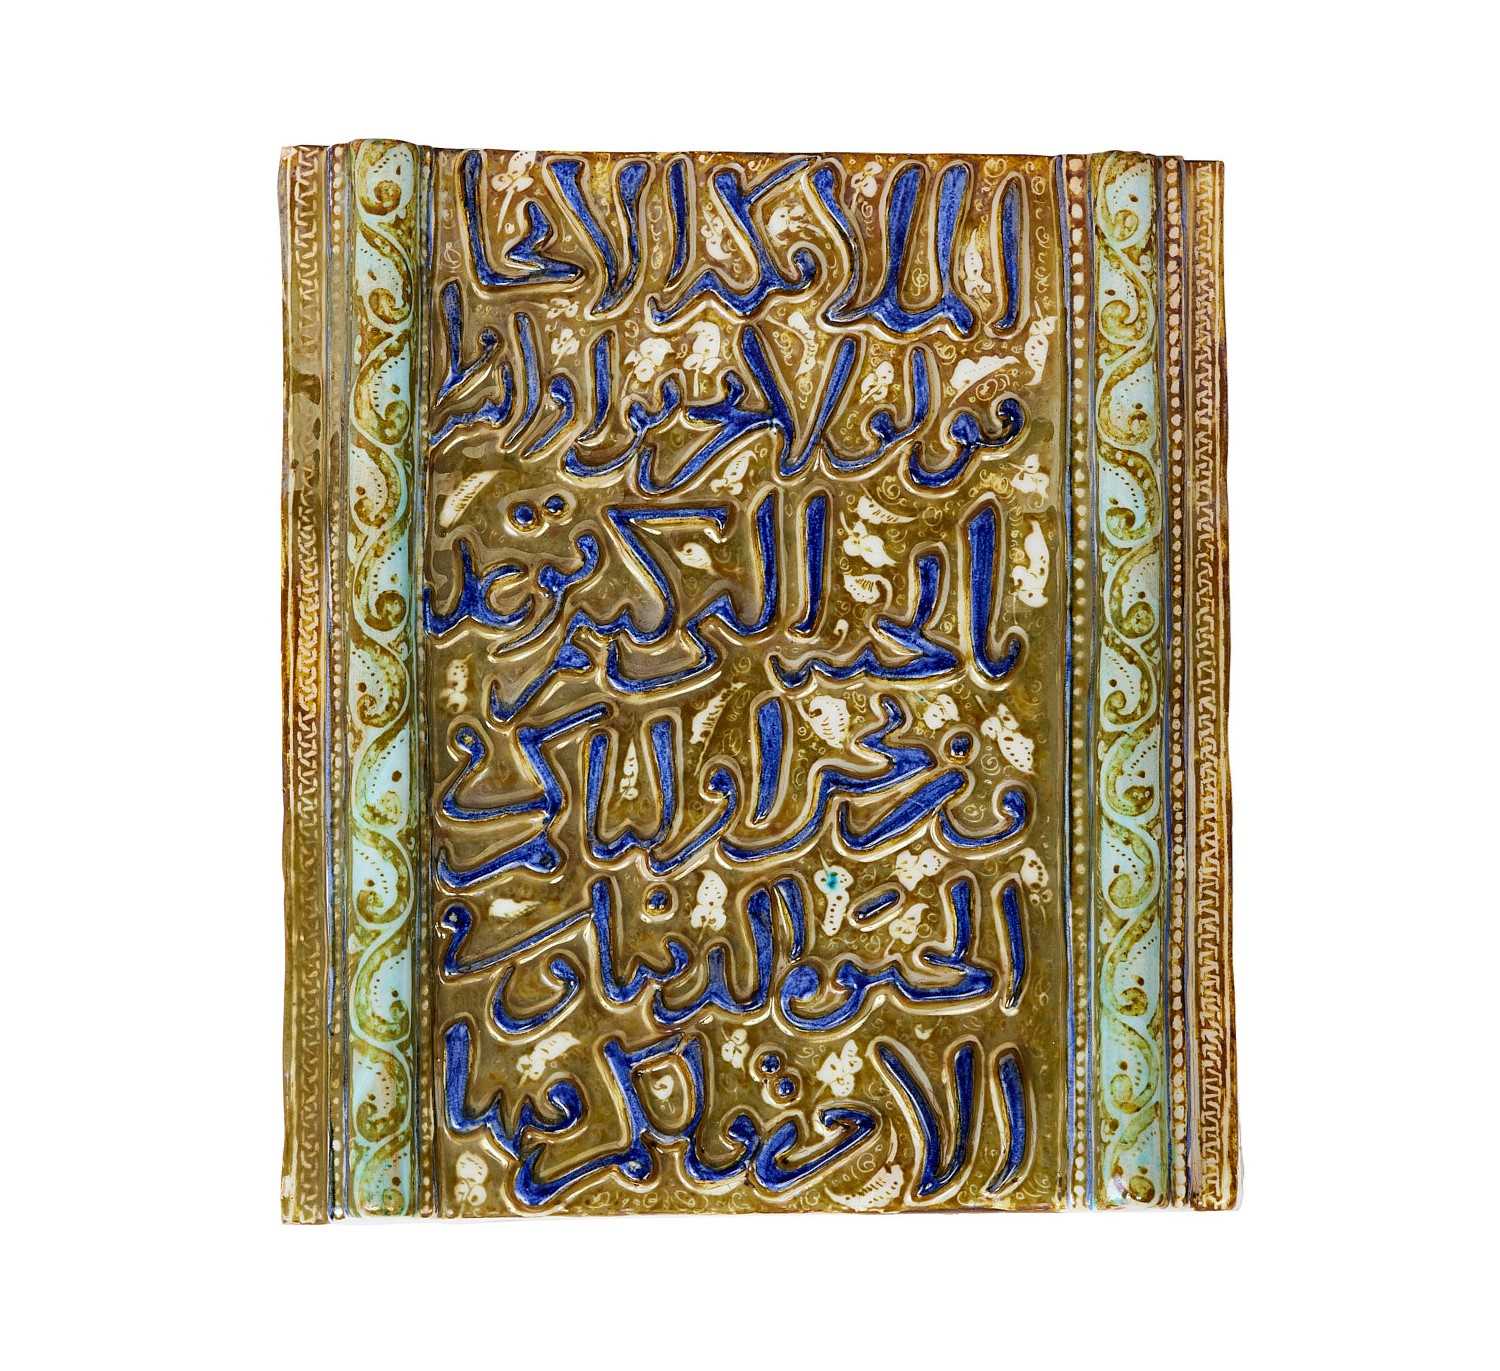 A 13TH / 14TH CENTURY STYLE KASHAN LUSTRE TILE